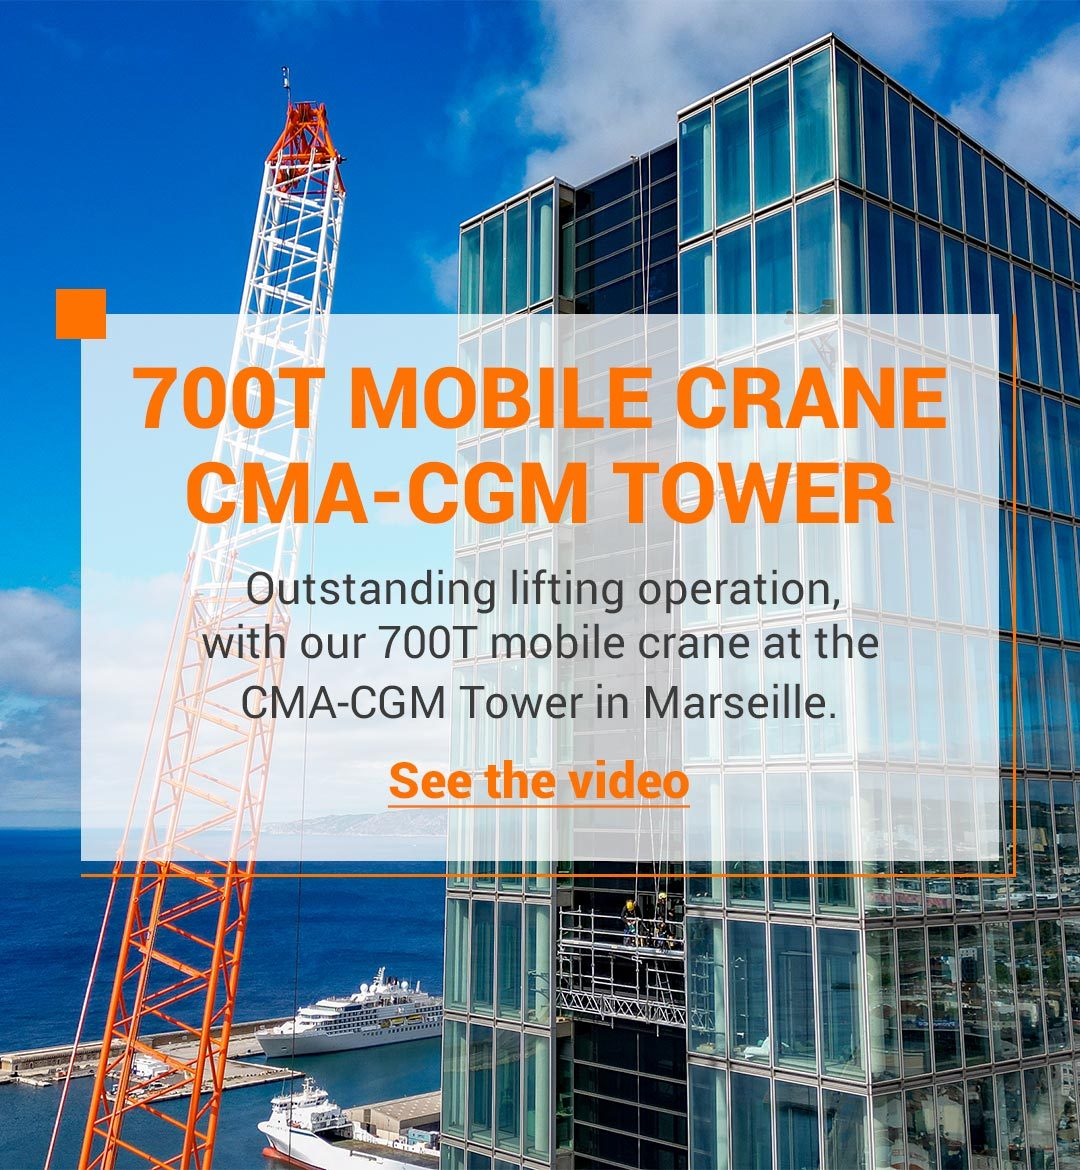 700T Mobile Crane CMA-CGM Tower - see the video